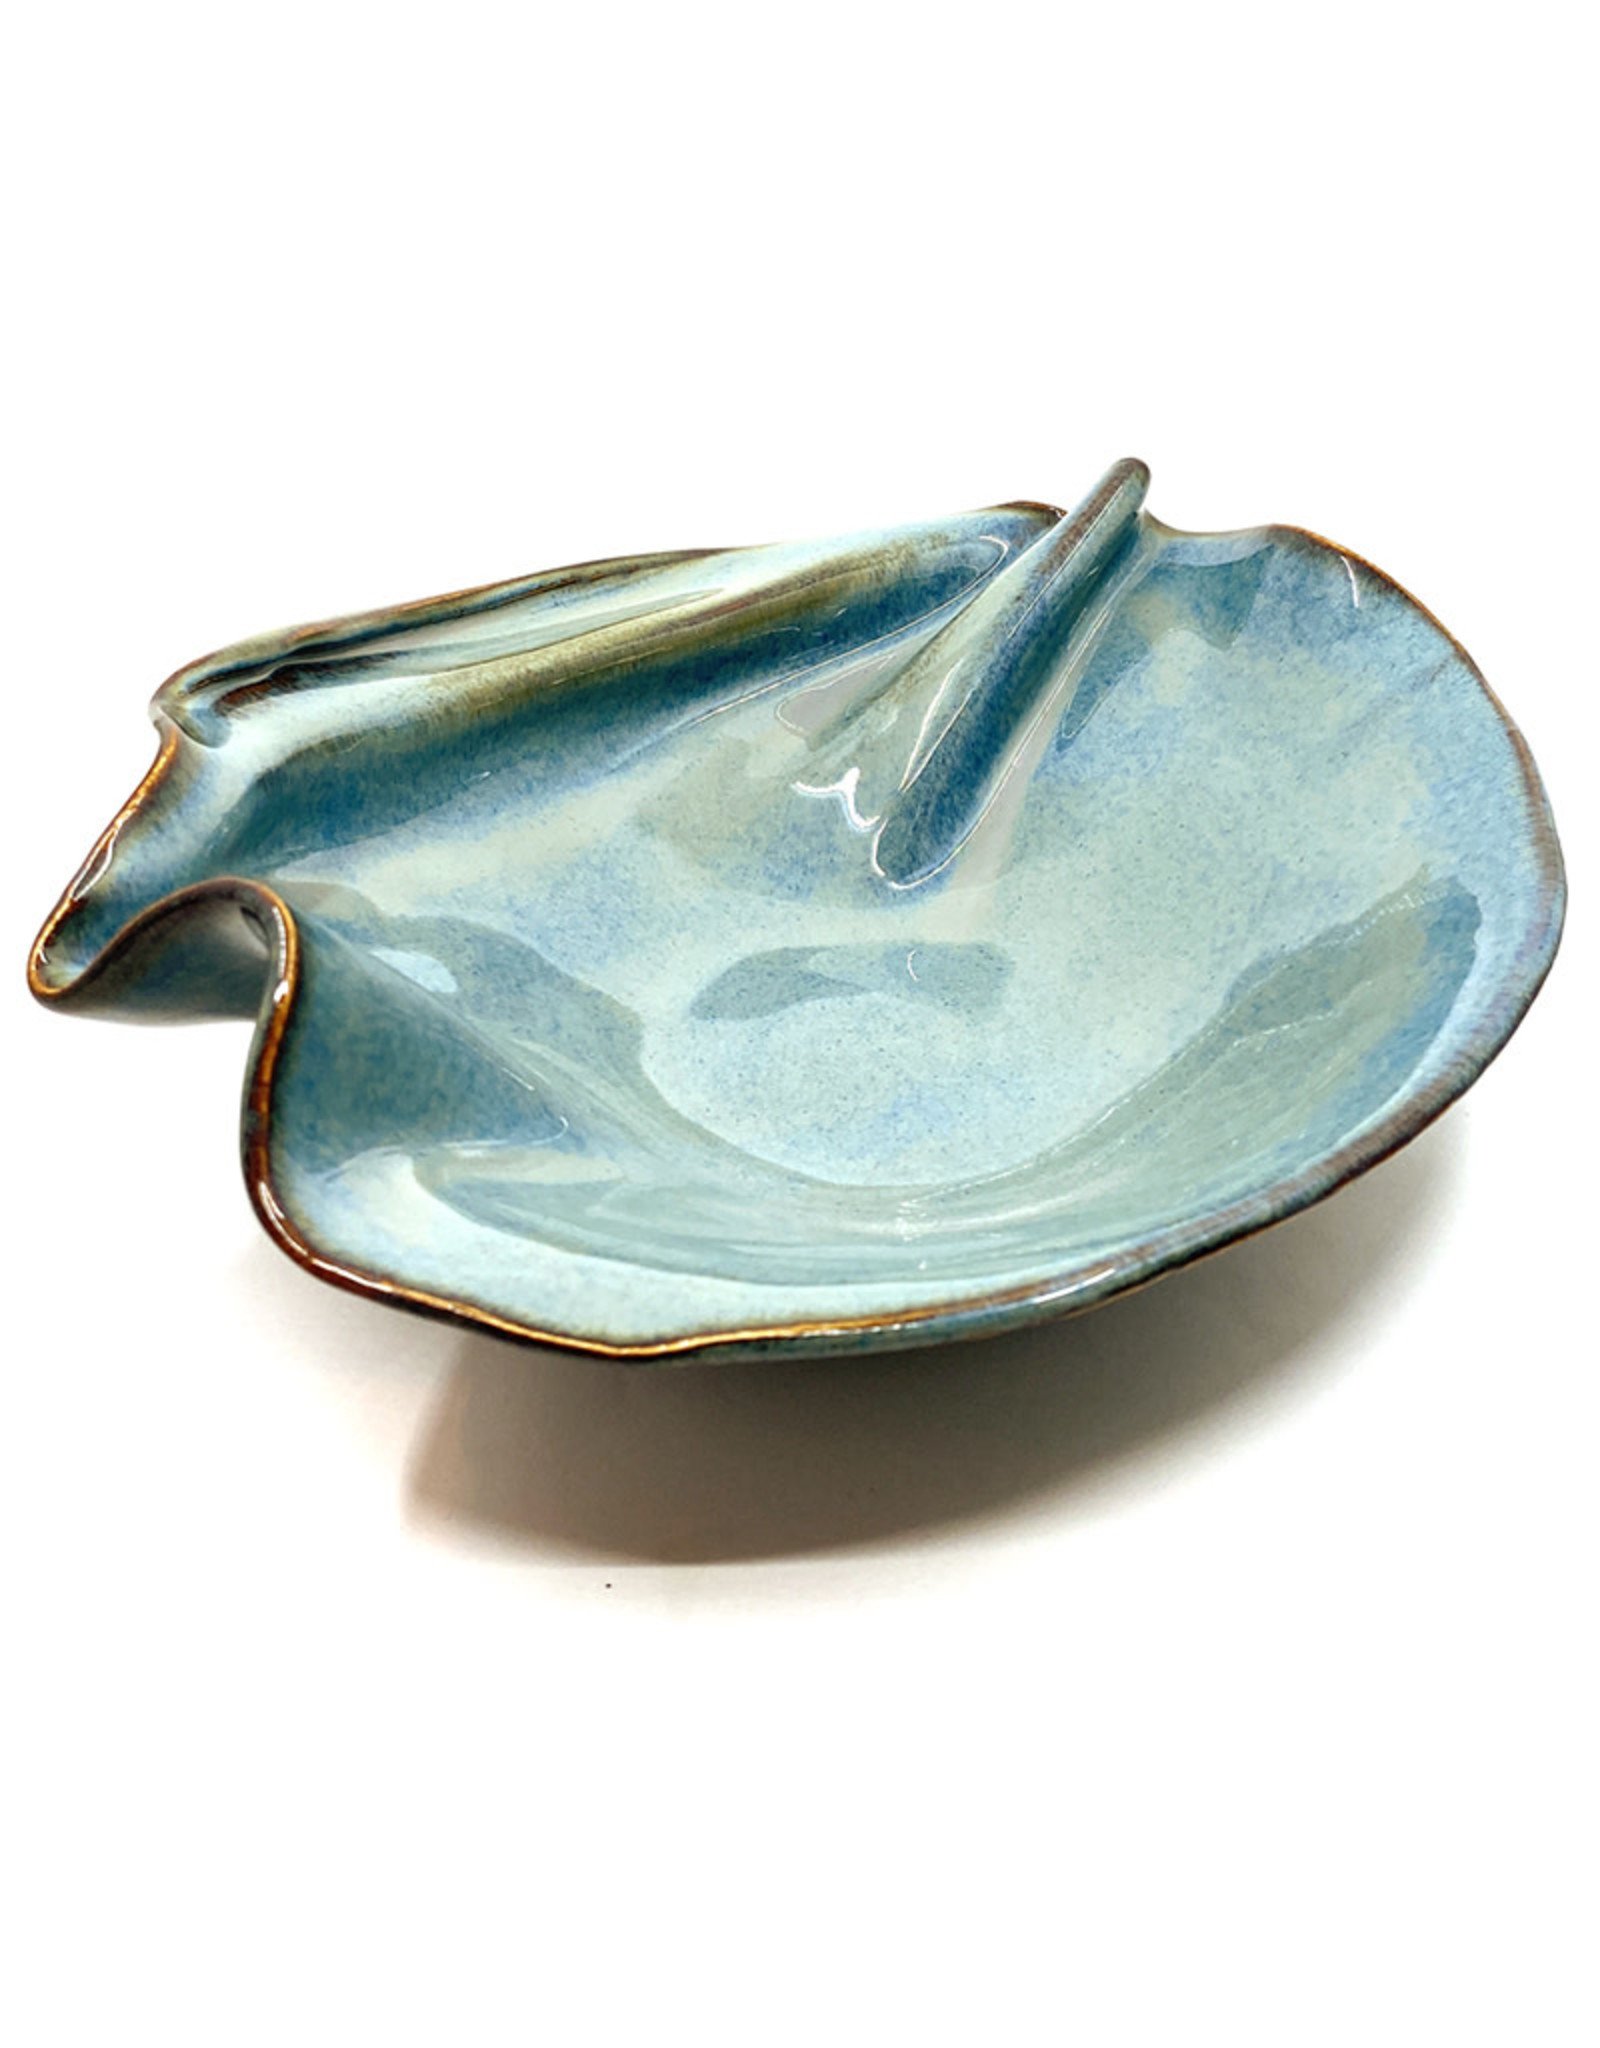 HILBORN POTTERY BLUE MEDLEY TAPENADE BOWL WITH SPOON